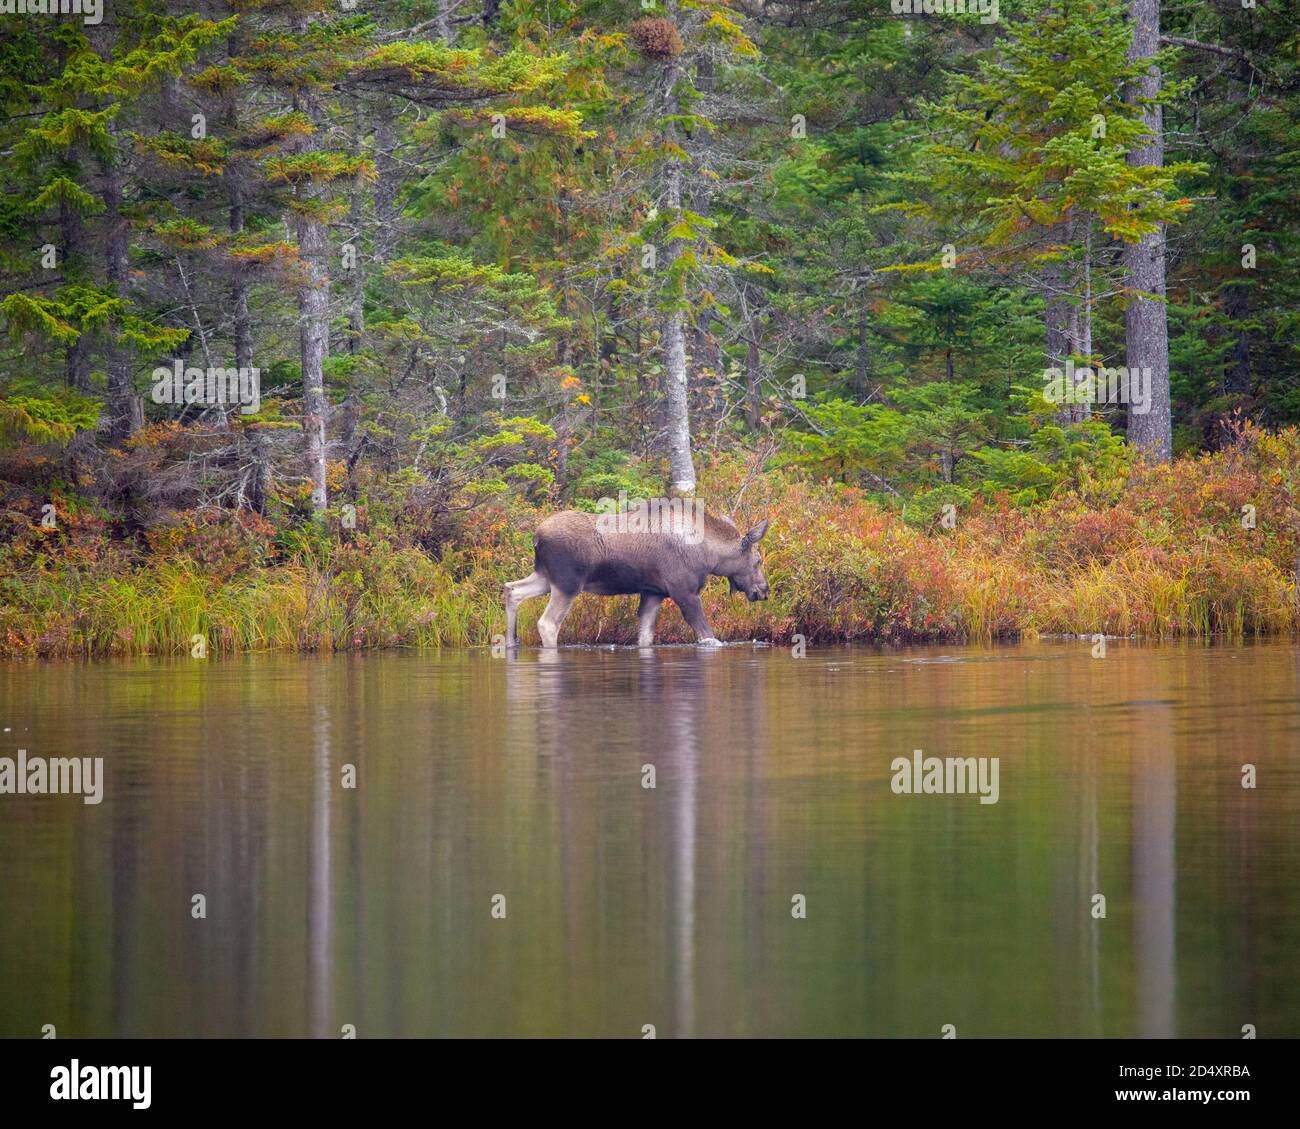 Moose wading in Sandy Pond, Baxter State Park Maine during fogy fall day. Stock Photo